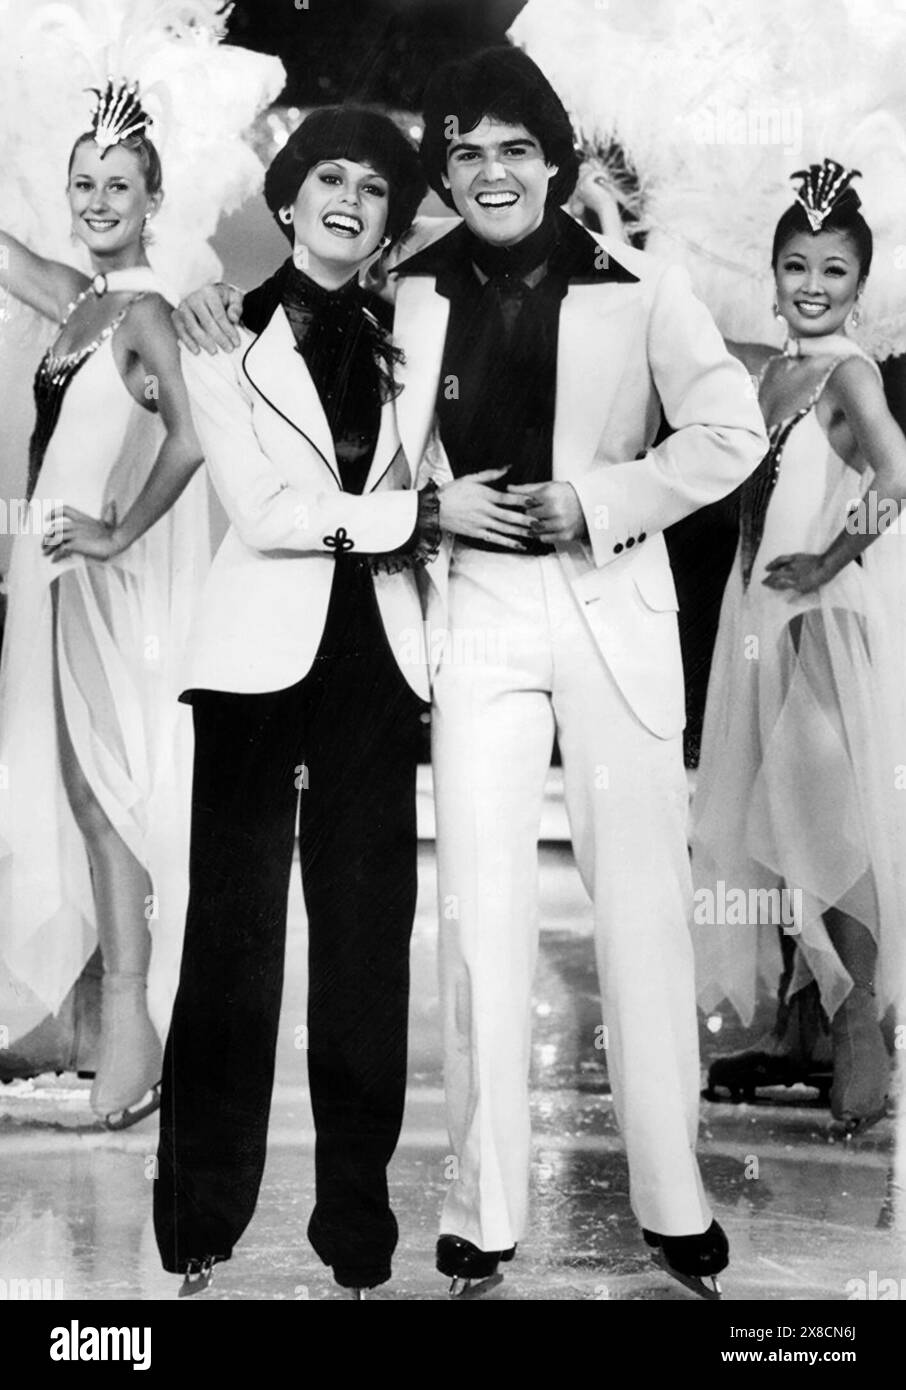 Marie and Donny Osmond. Portrait of the American singers Marie Osmond (b. 1959) and Donald Clark Osmond (b. 1957), publicity still for The Donny & Marie Show, 1977. Stock Photo